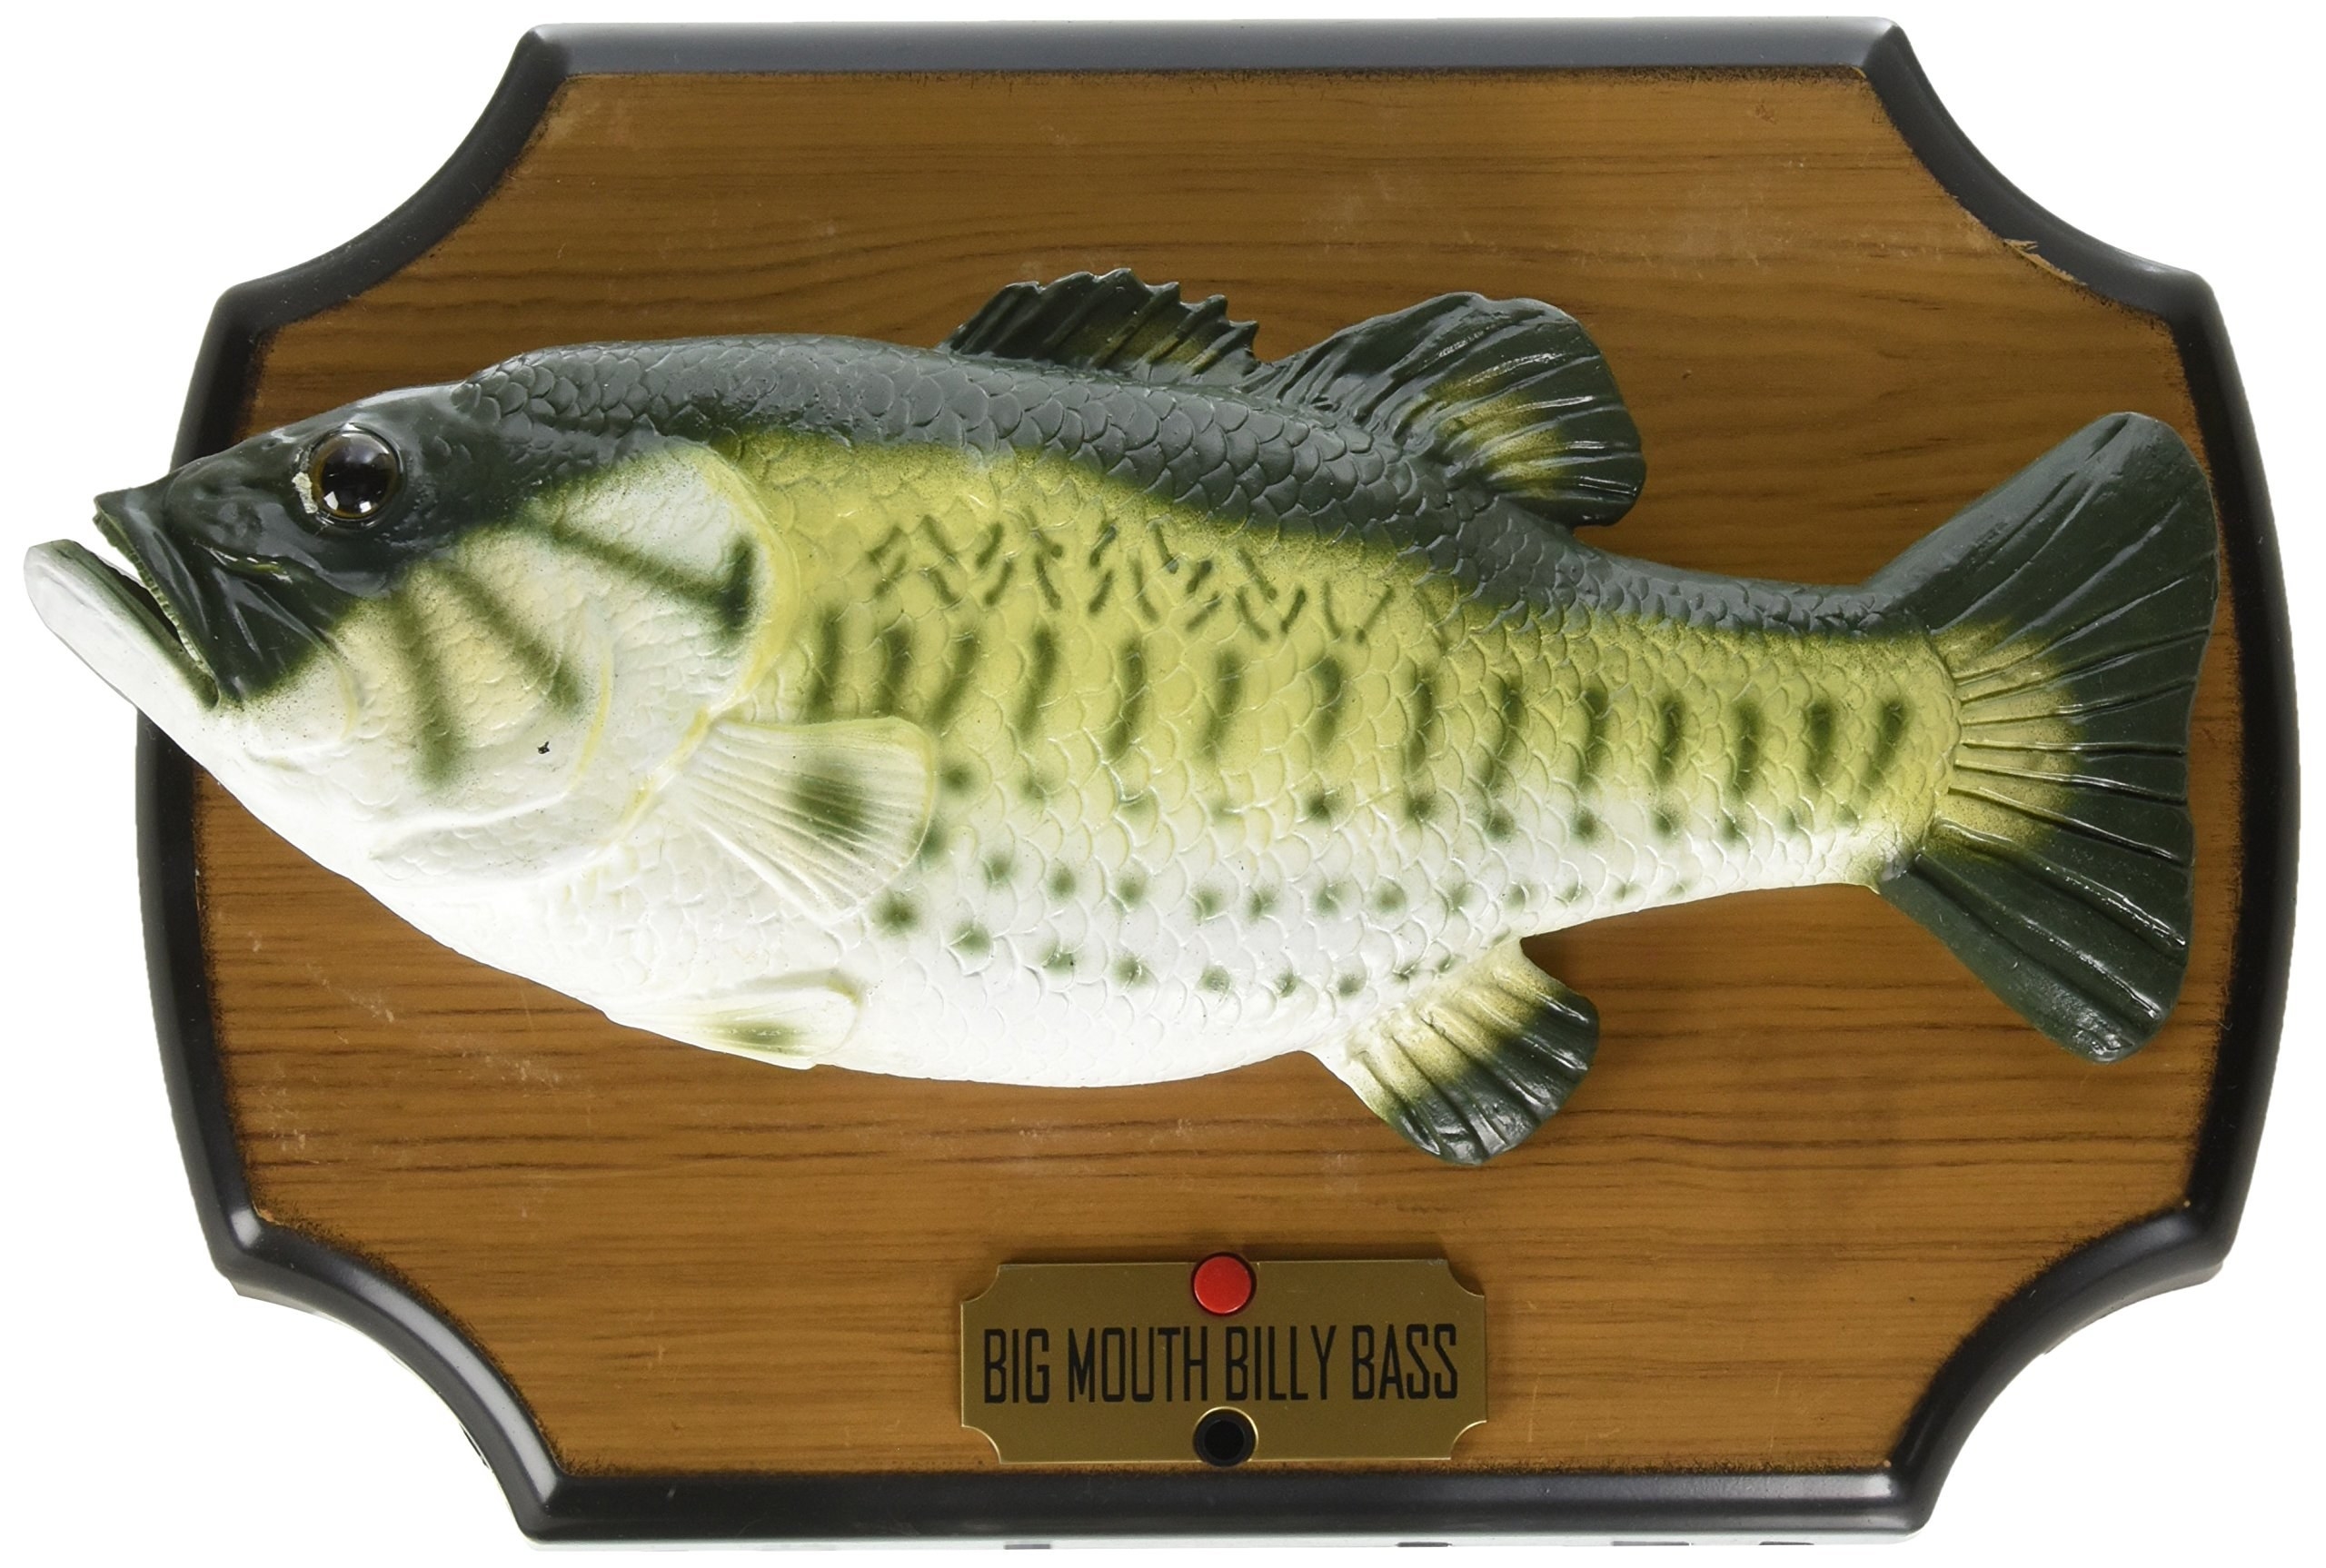 Big Mouth Billy Bass toy